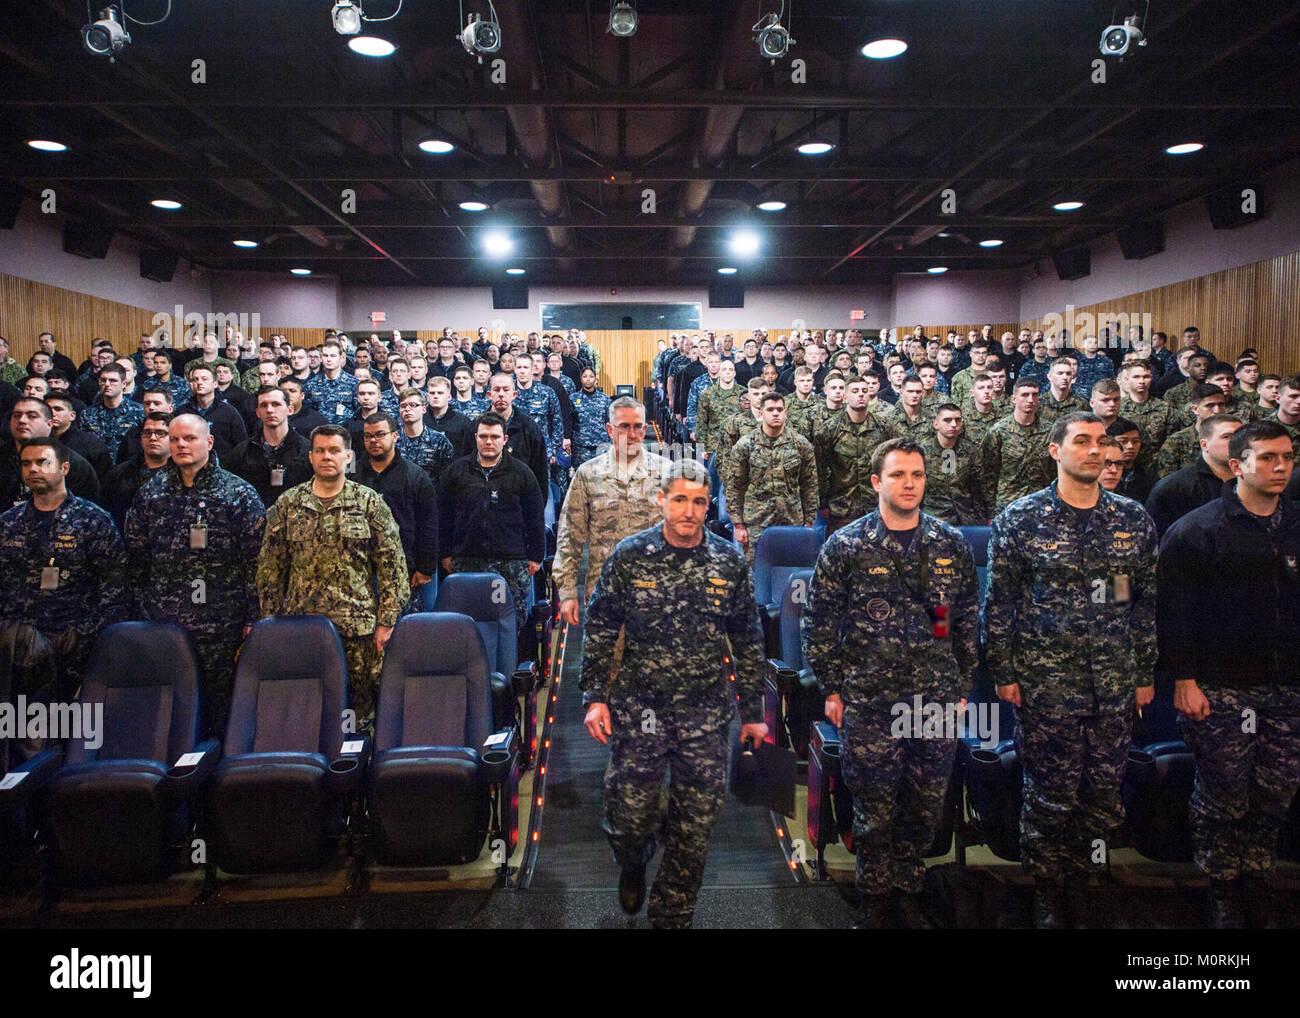 BANGOR, Wash. (Jan. 18, 2018) - U.S. Air Force Gen. John Hyten, commander of U.S. Strategic Command, enters the base theater with  Commander, Submarine Group 9, Rear Adm. Blake Converse before addressing over 350 Sailors, Marines, and civilians at Naval Base Kitsap-Bangor, Wash., Jan 18, 2018. Hyten visited staff and facilities assigned to Commander Submarine Group 9 at Naval Base Kitsap-Bangor to see the operations of one leg of the nuclear triad. (U.S. Navy Stock Photo